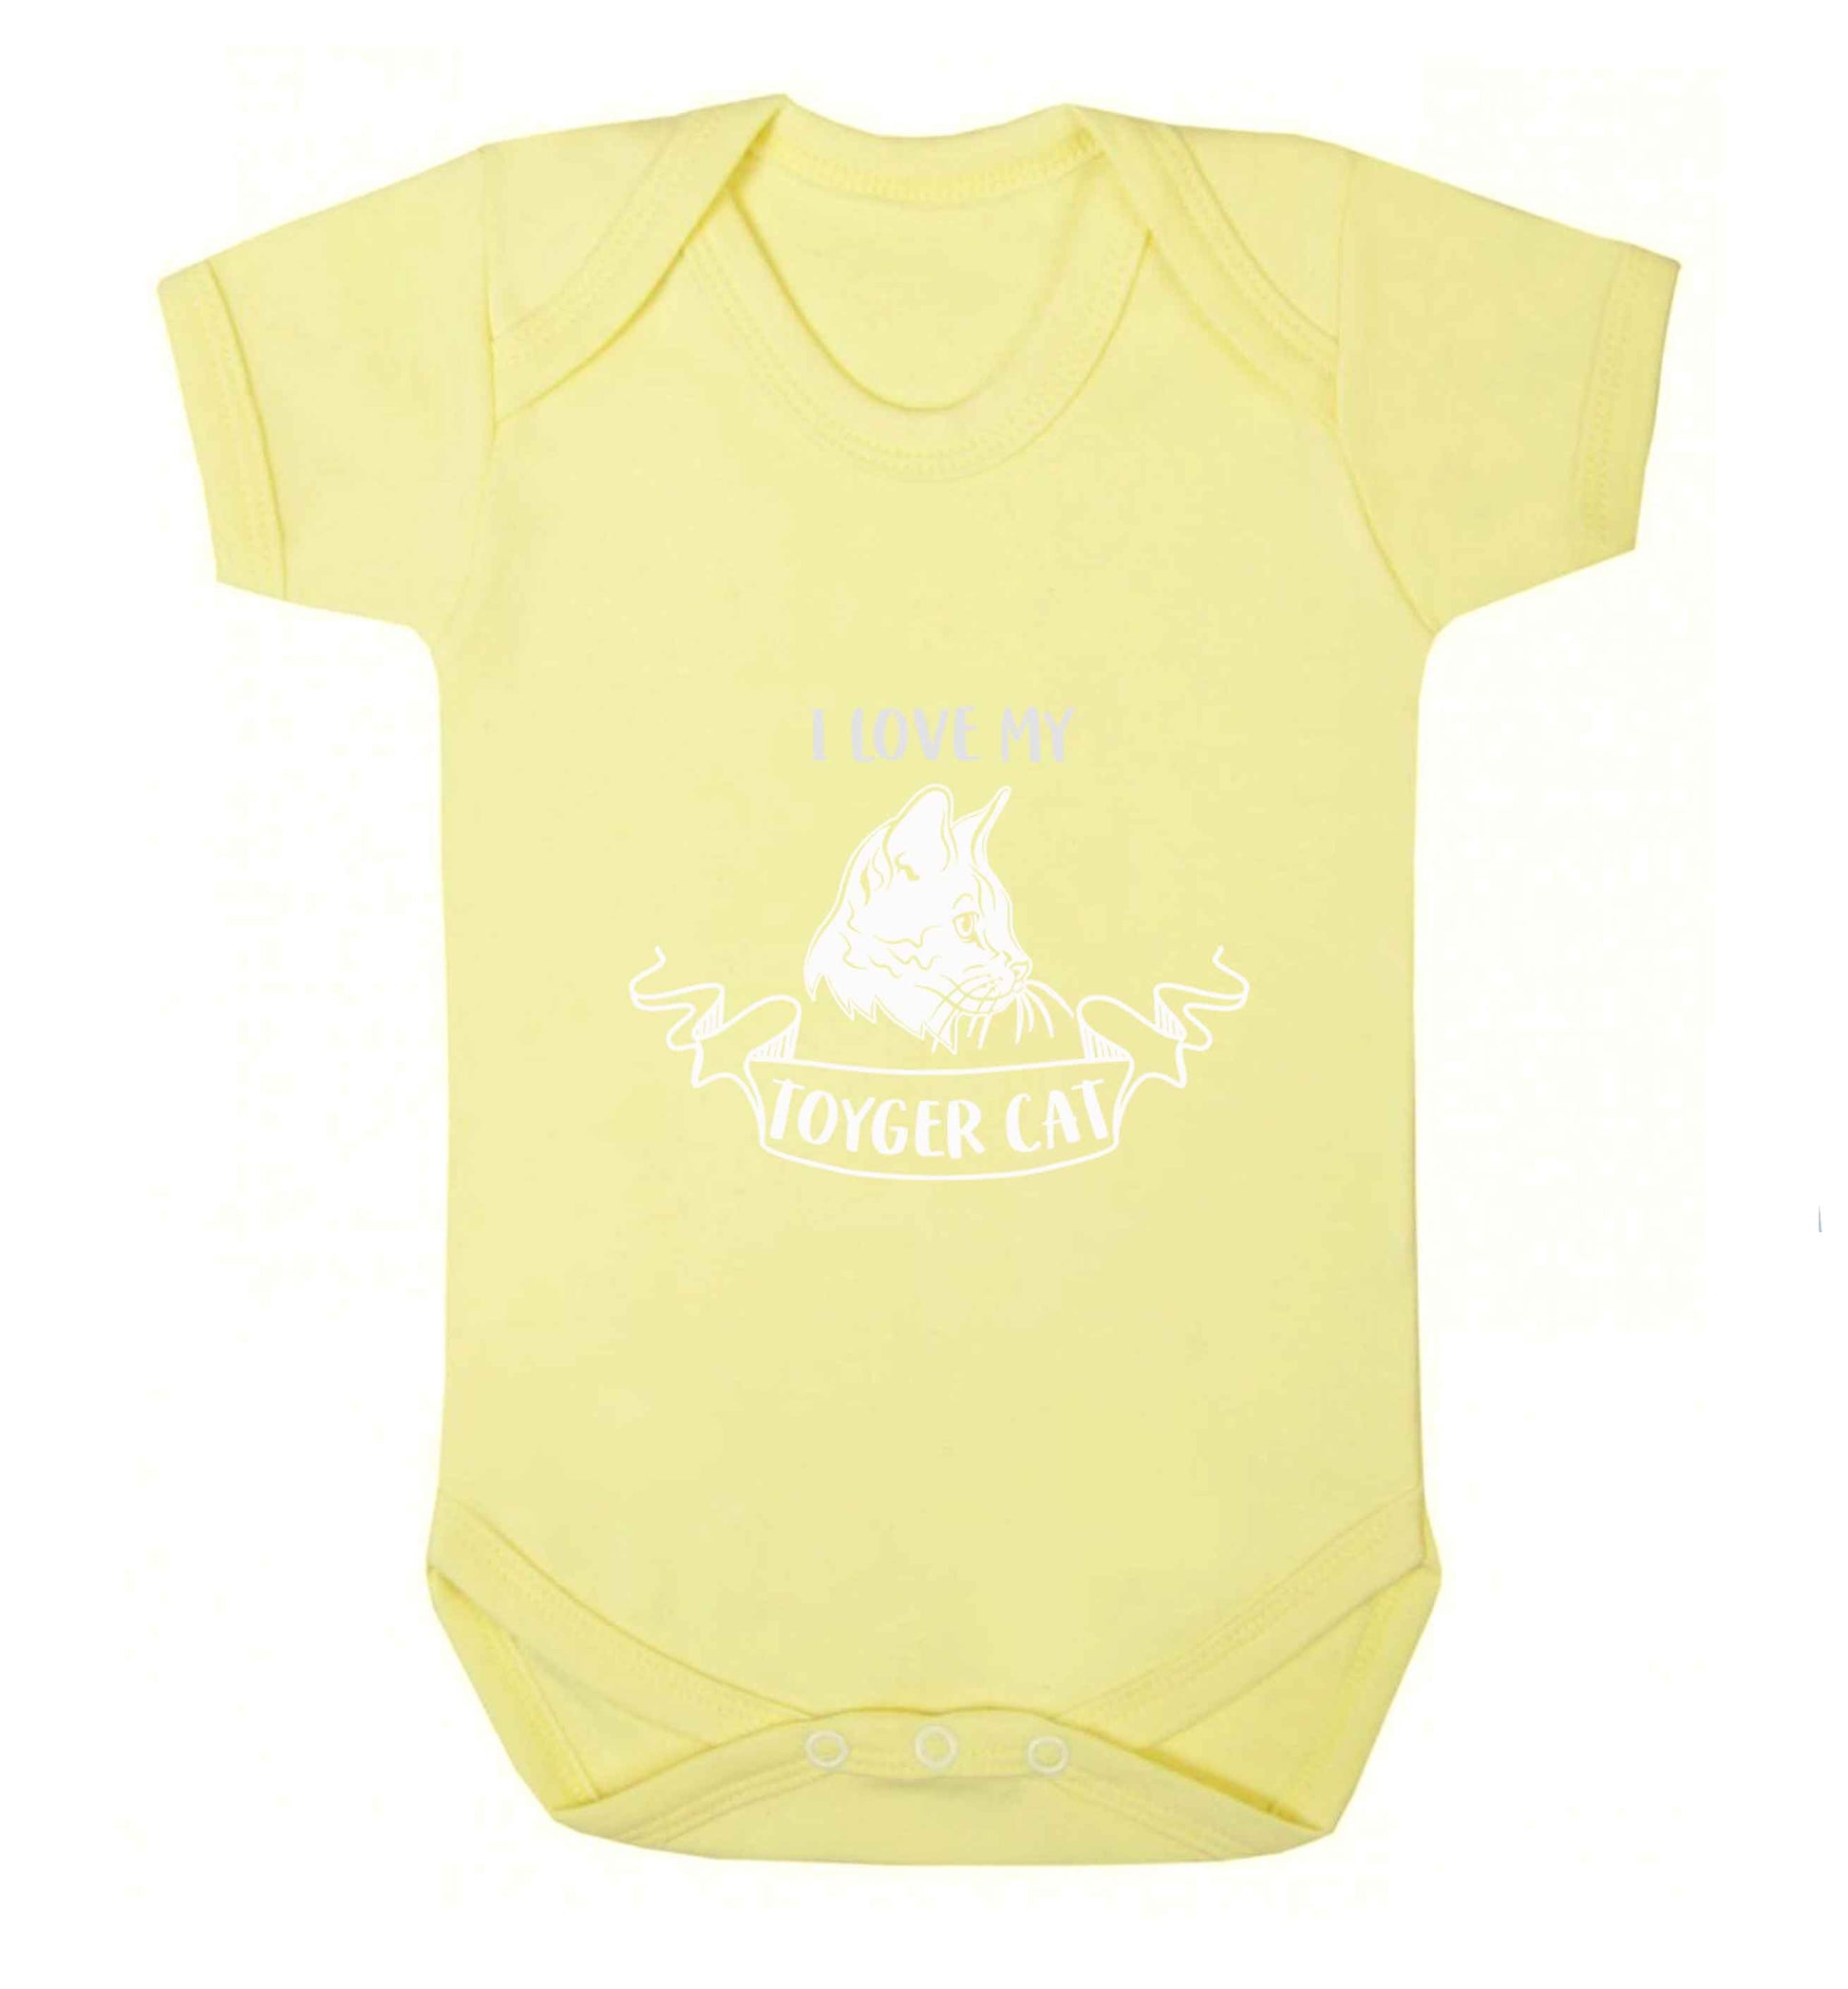 I love my toyger cat baby vest pale yellow 18-24 months